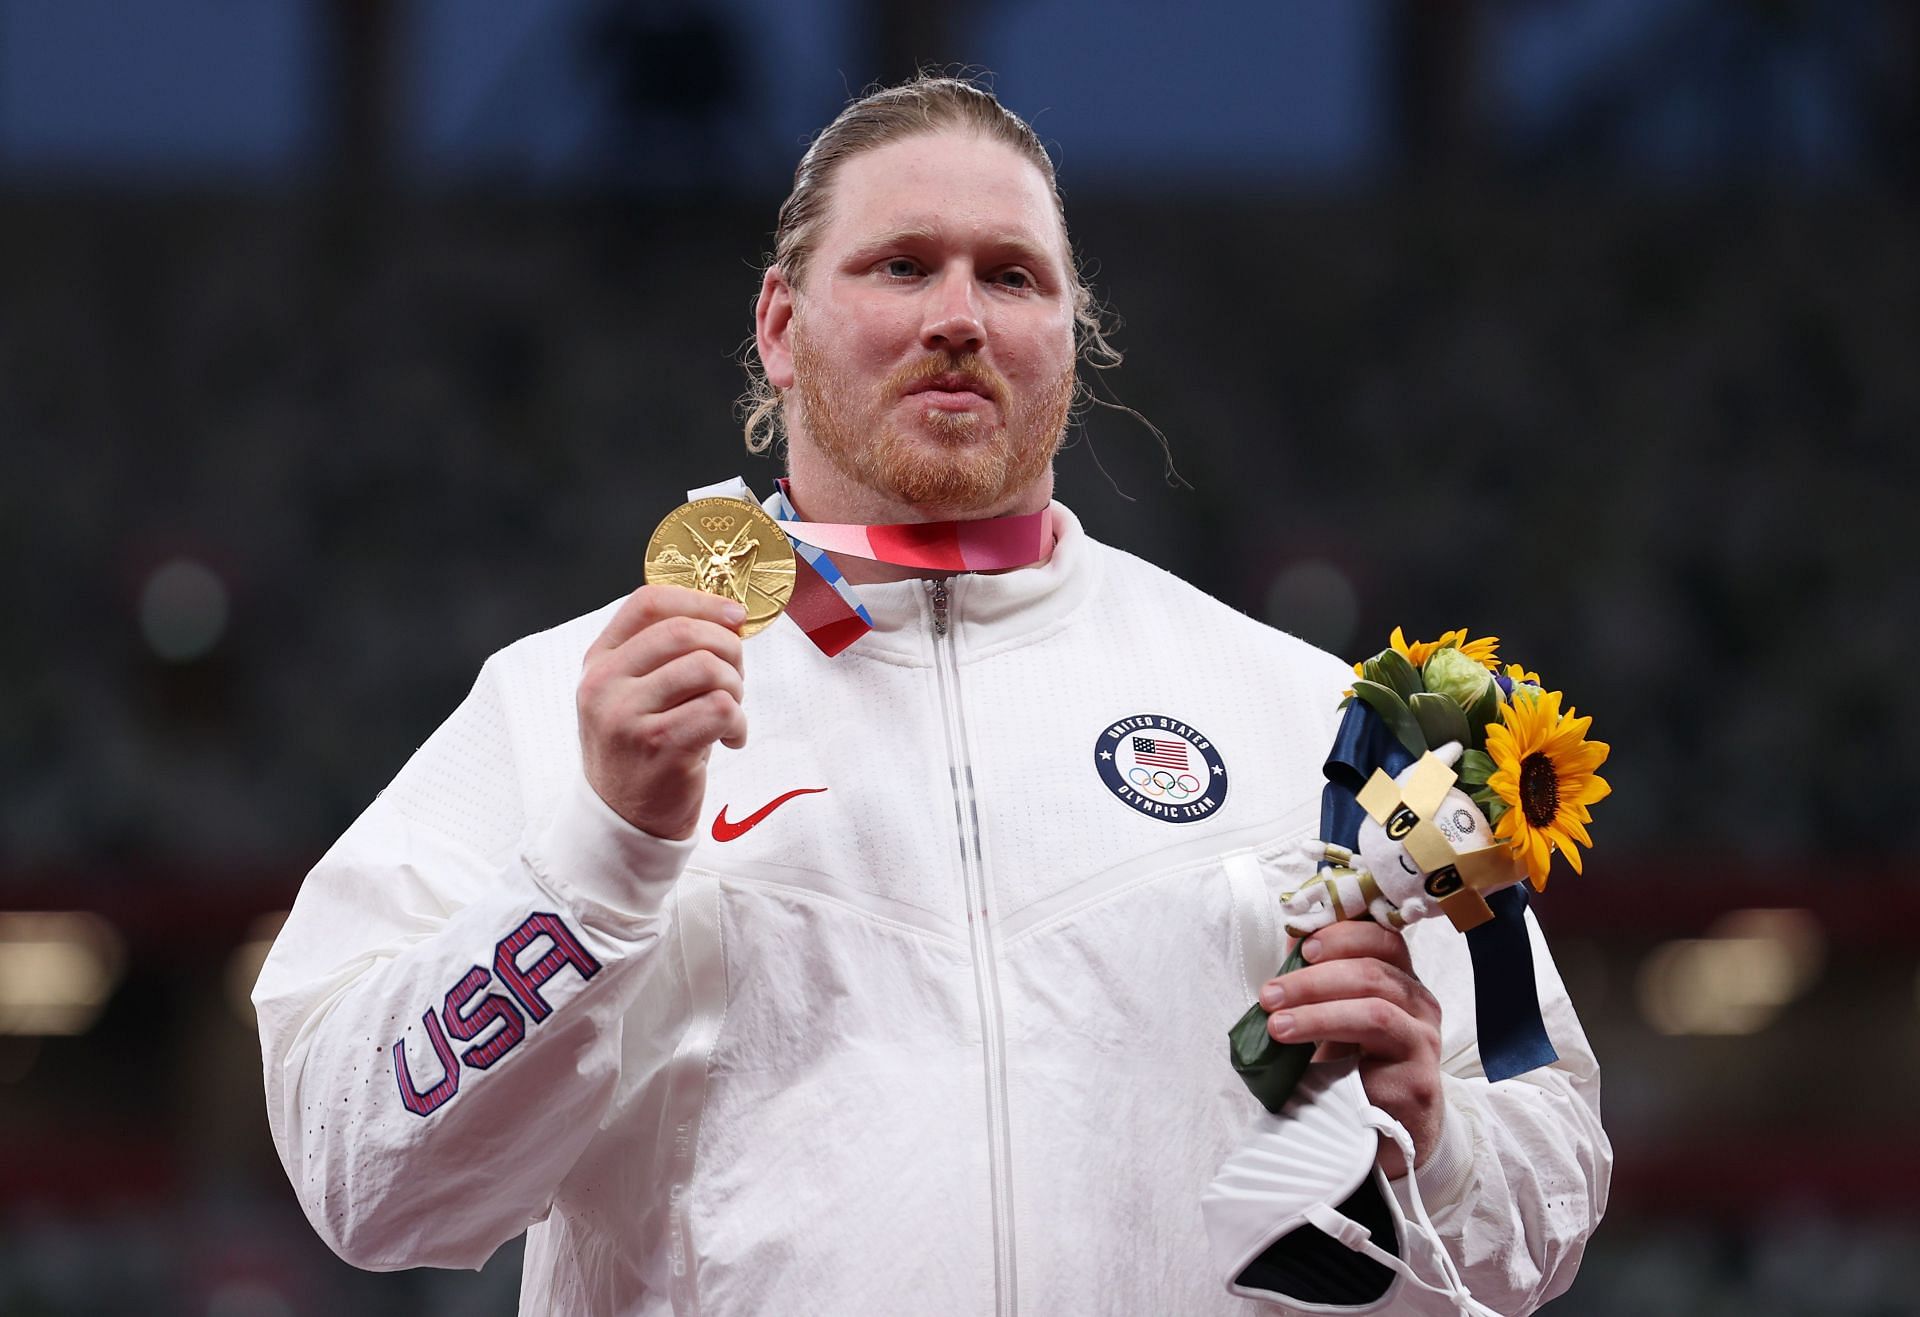 Ryan Crouser is the Olympic and Diamond League champion in shot put.